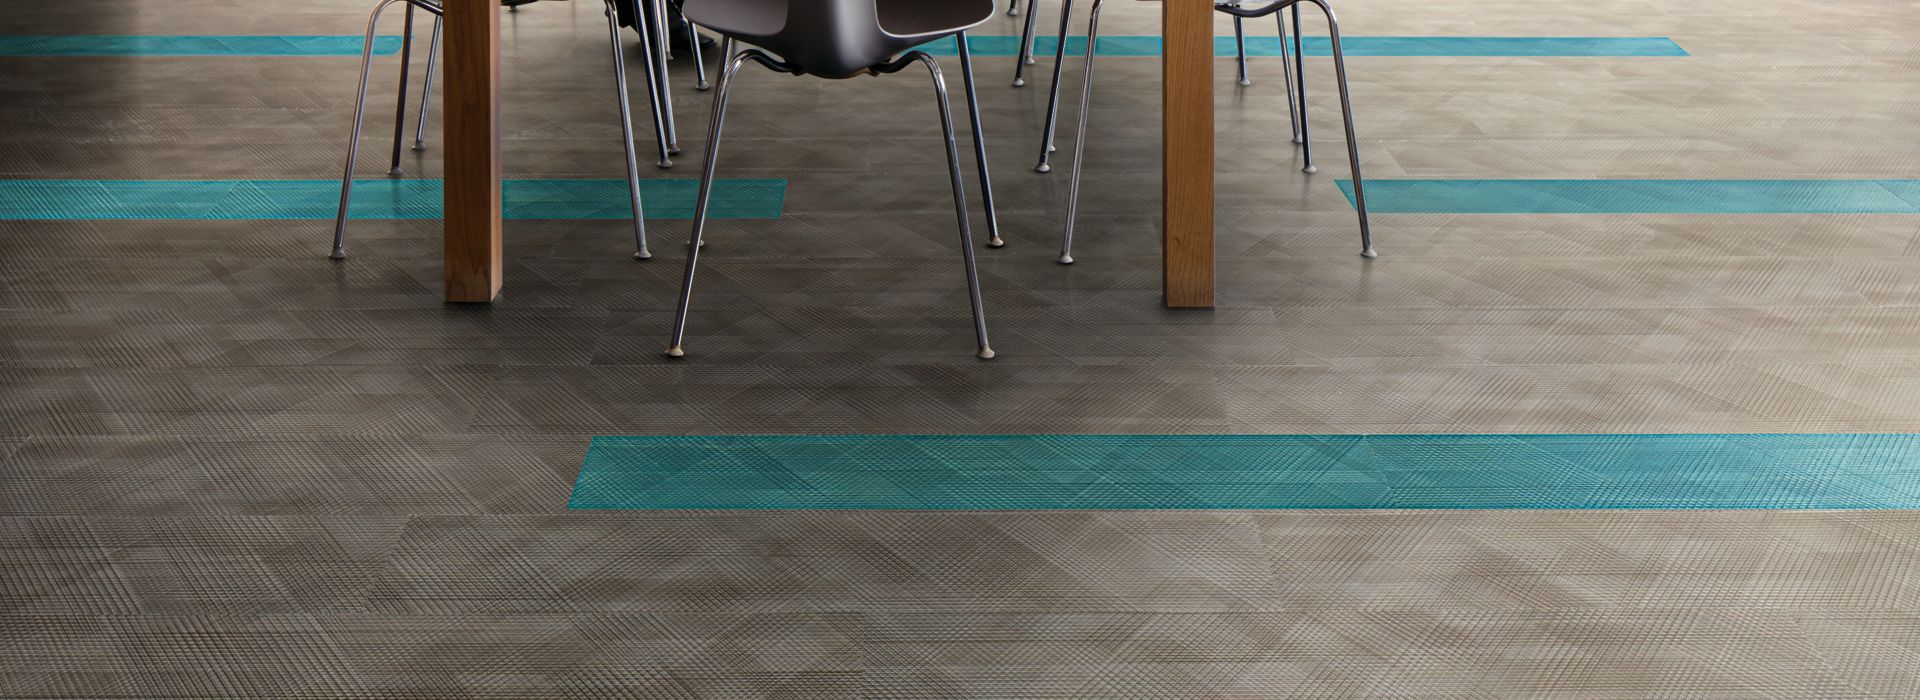 Interface Drawn Lines LVT in cafeteria setting with long table and chairs  número de imagen 1